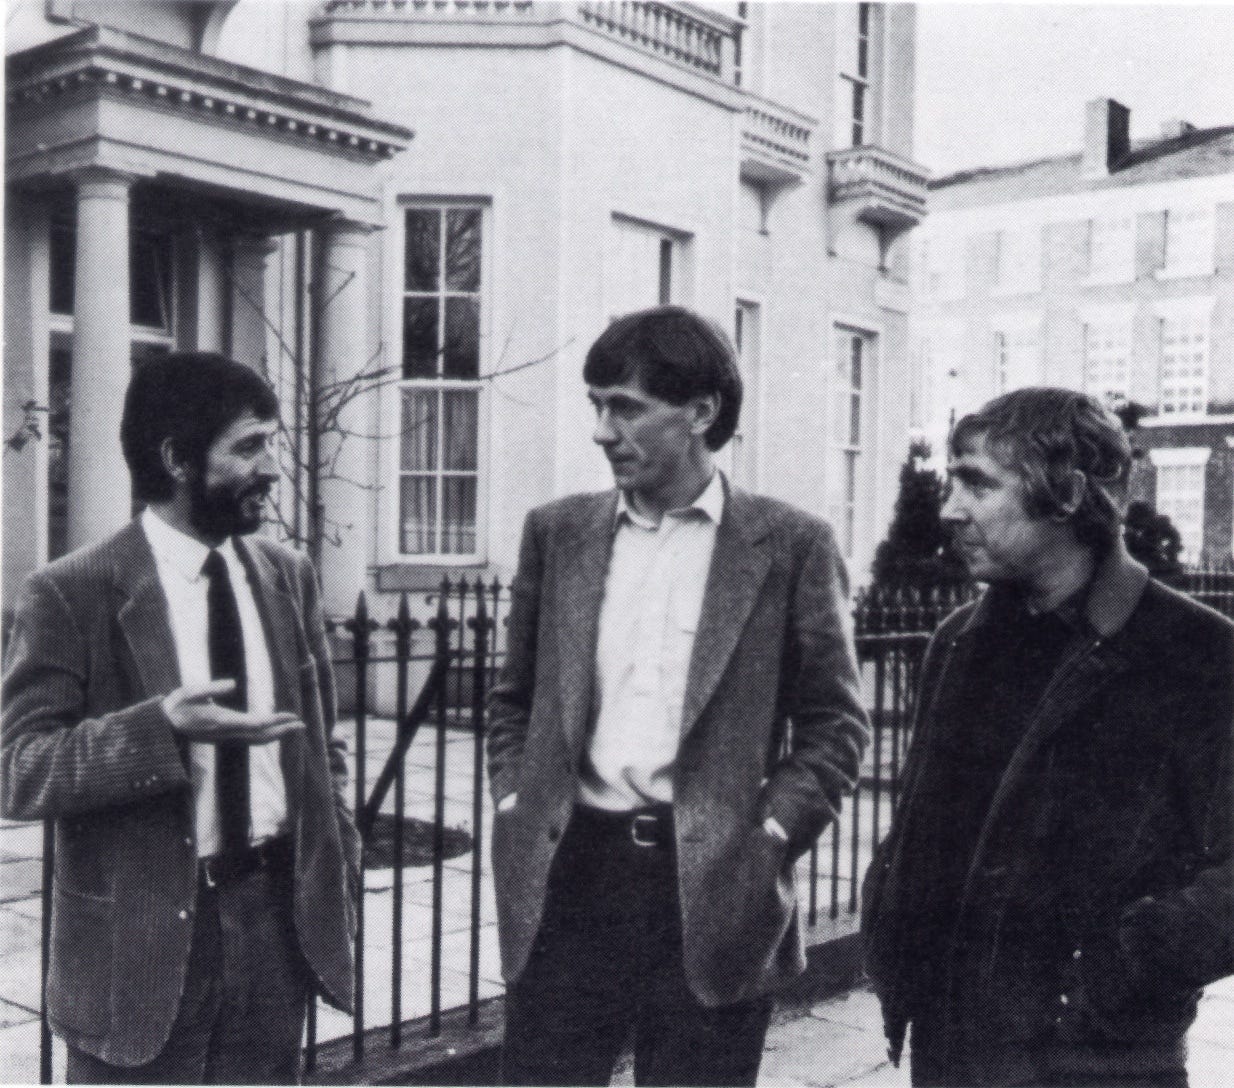 The Shelter boys: Dave Bebb, Neil McIntosh (then Director) and Des Wilson (founding Director0 outside Falkner Square, late seventies.